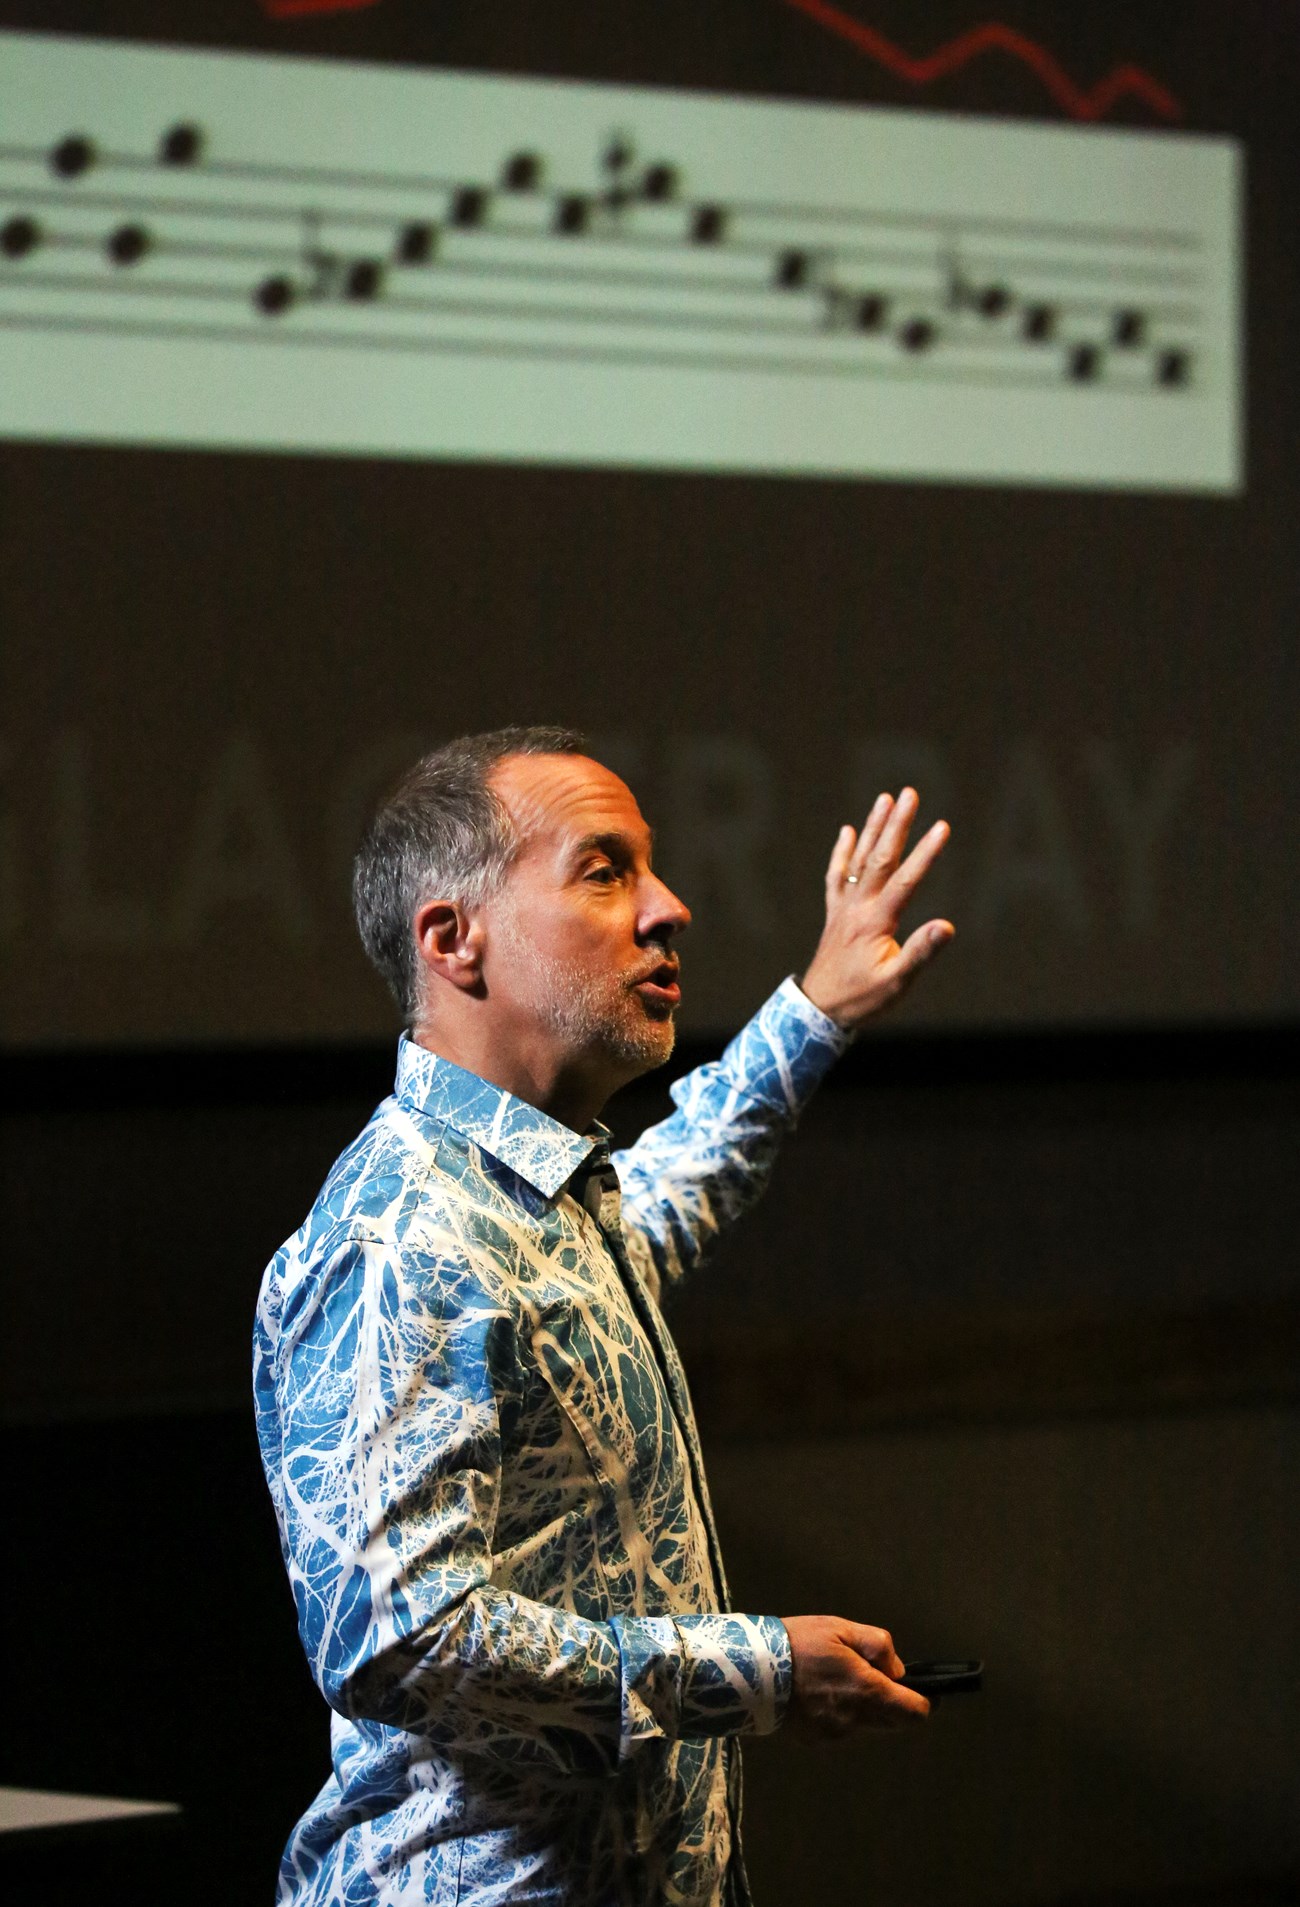 man in an auditorium gesturing in front of a screen showing music notes